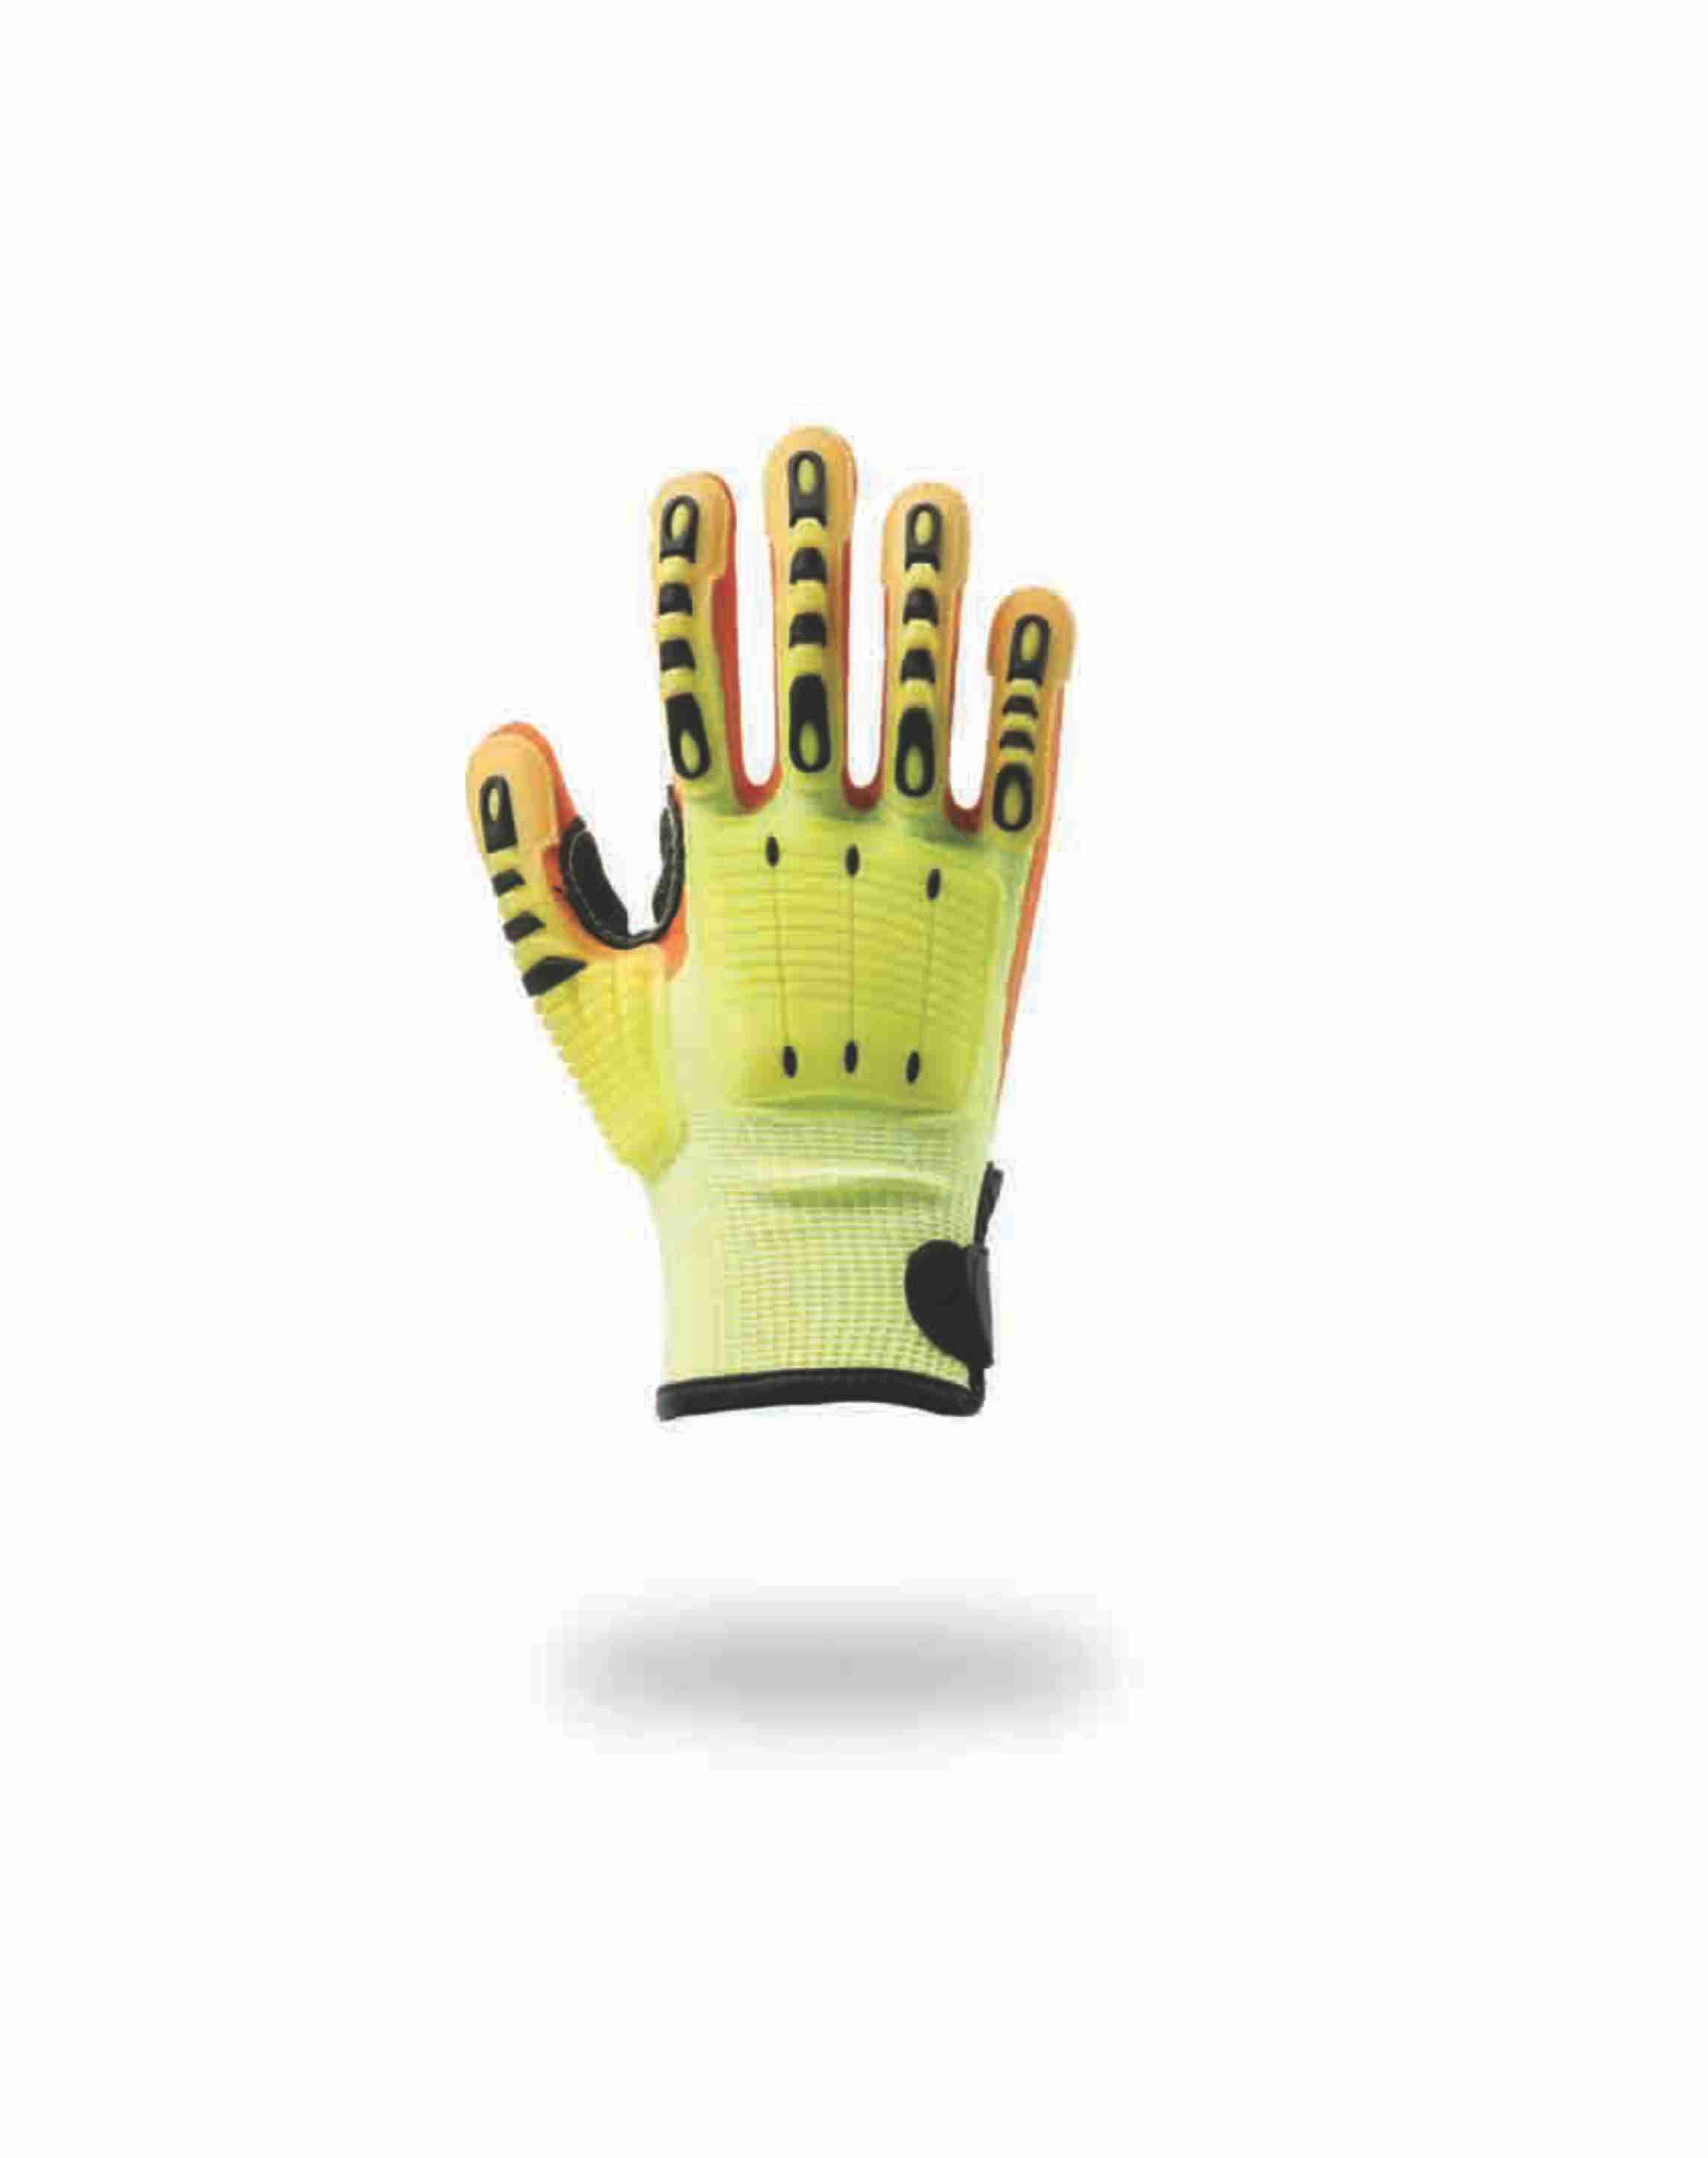 Lint Free Polyester Cut Resistant Gloves